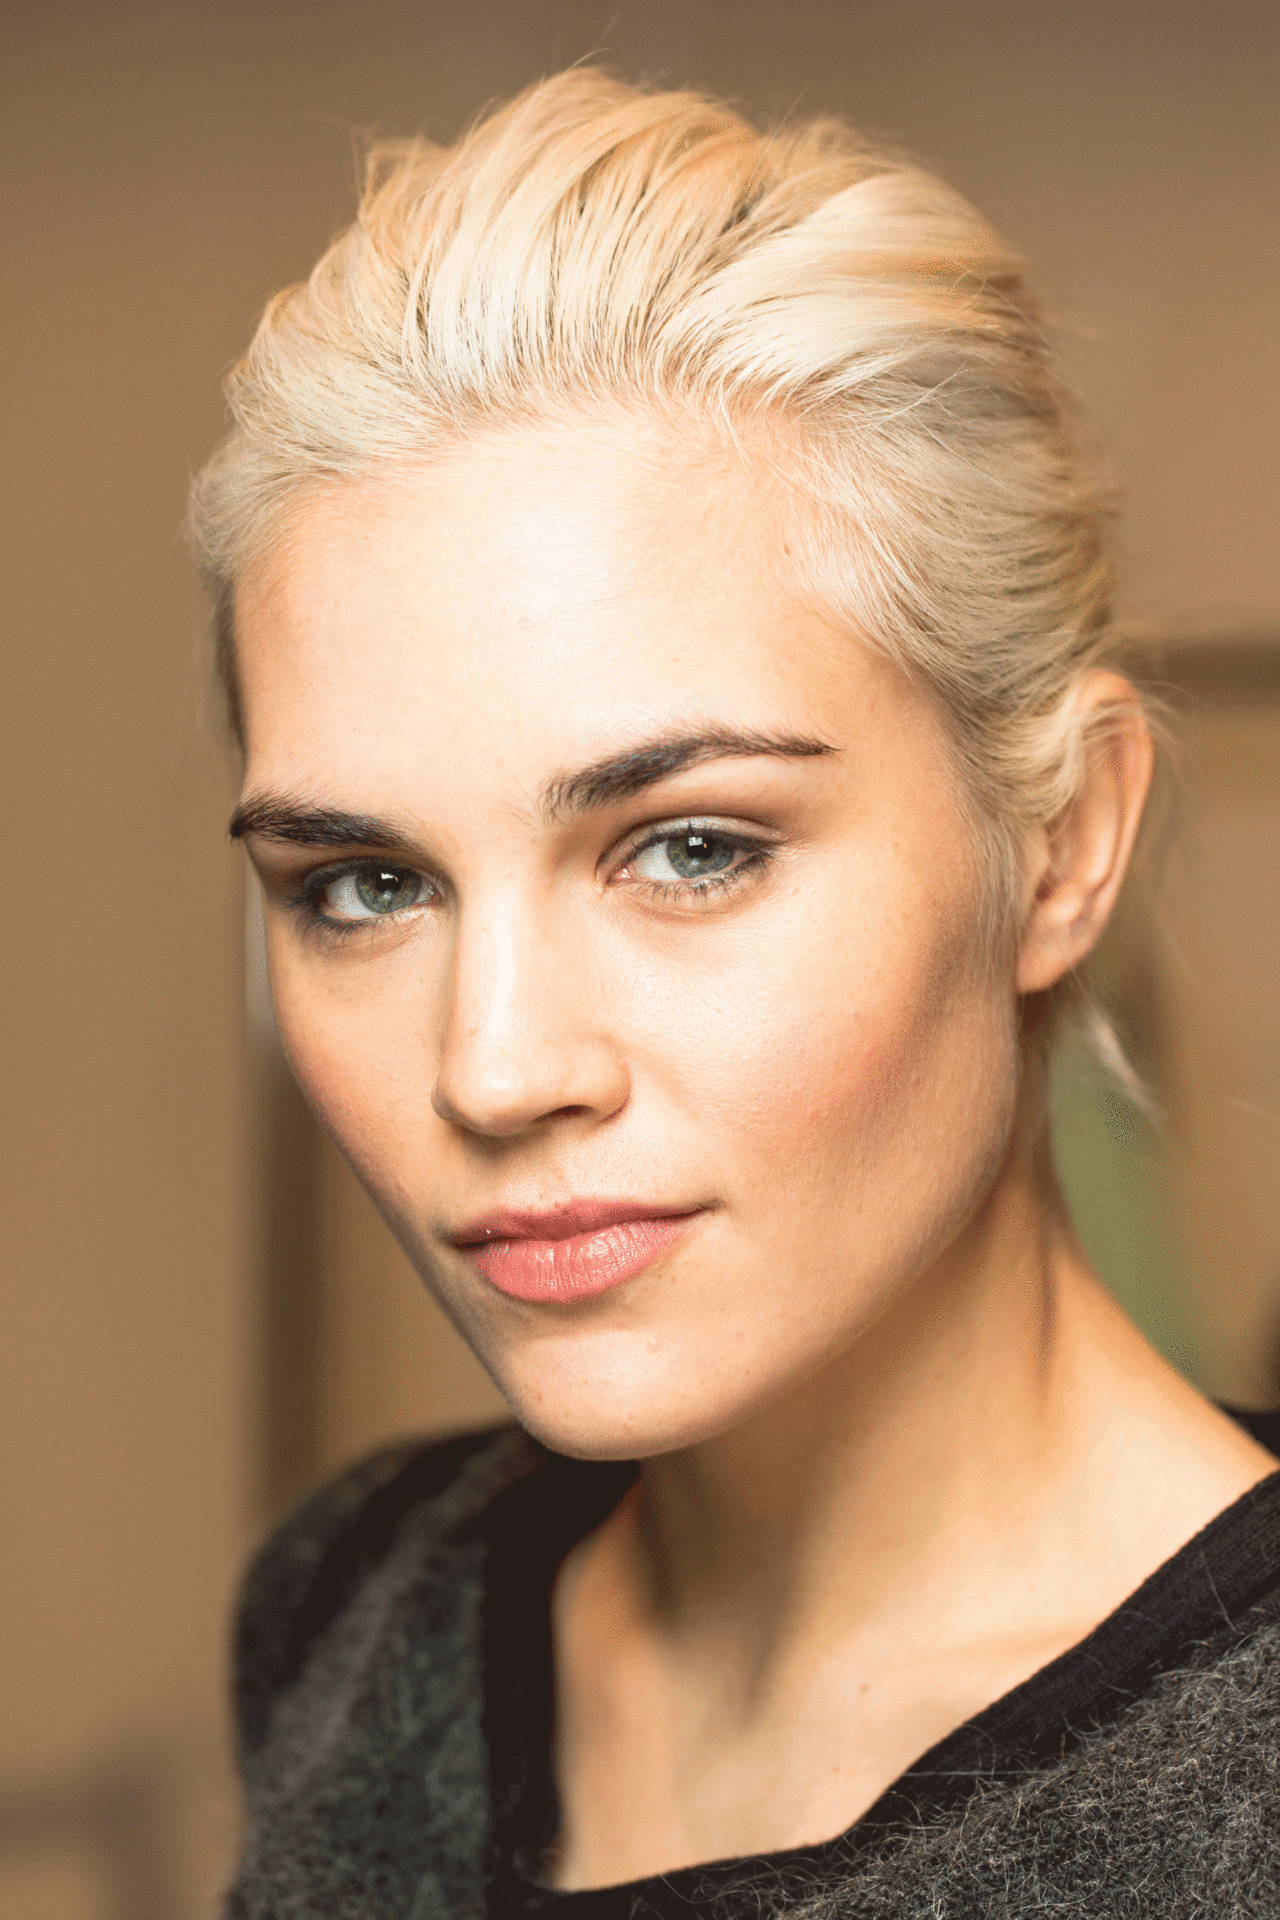 How To Dye Your Hair At Home Like A Professional